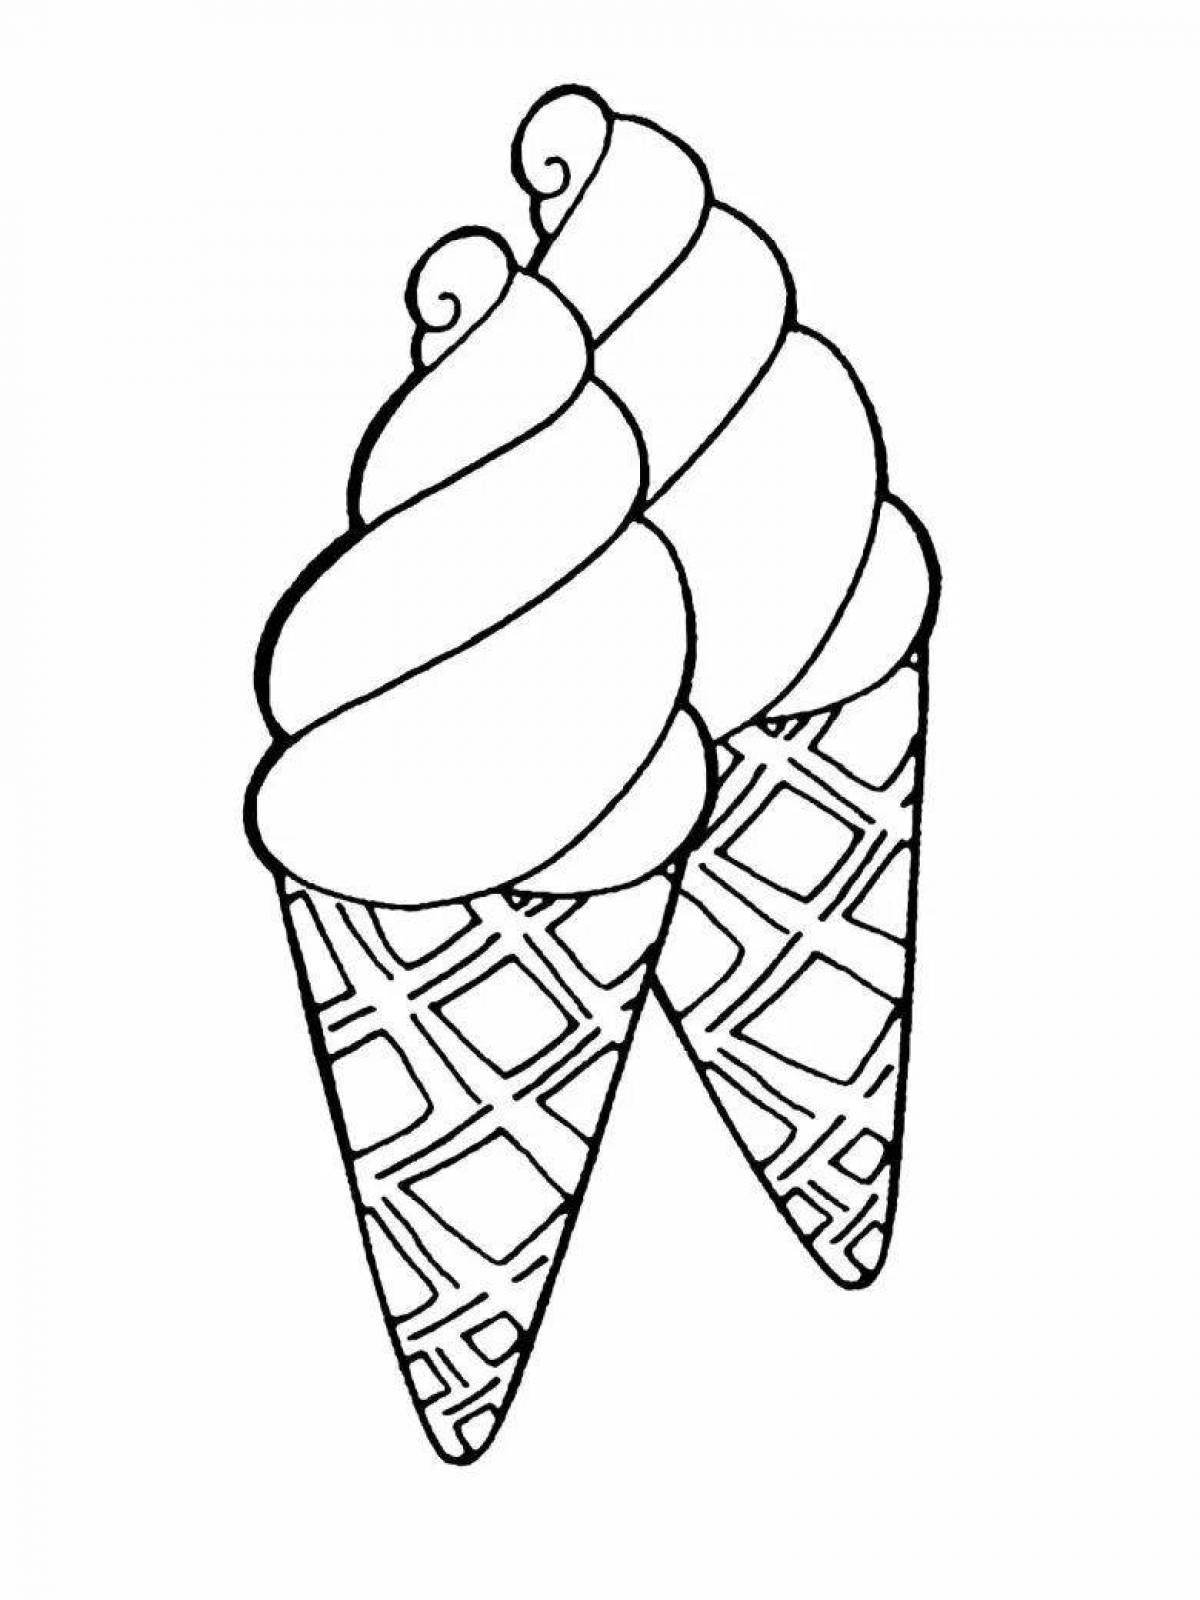 Cute ice cream coloring page for kids